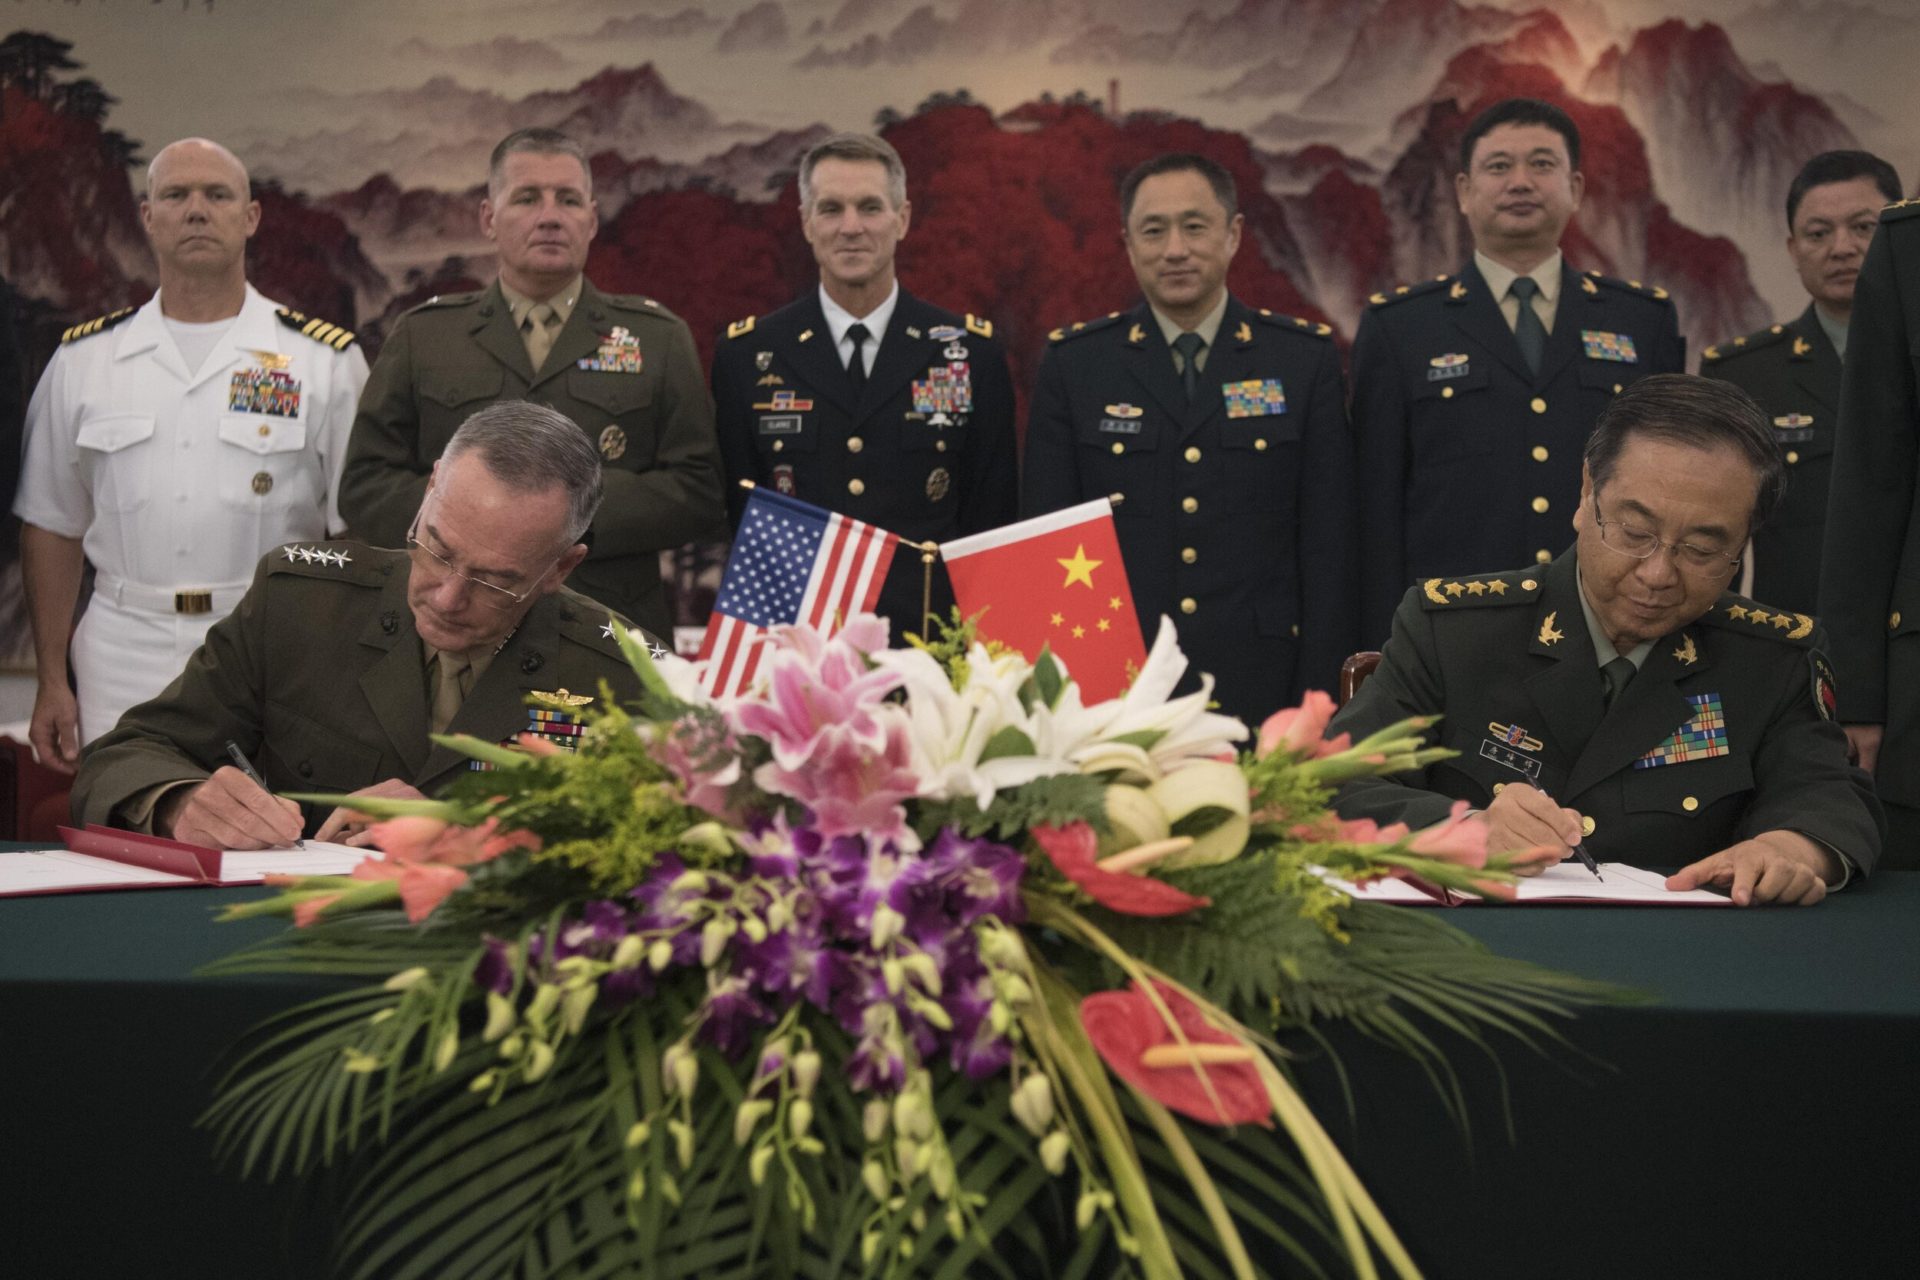 August 15, 2017 – Marine Corps Gen. Joseph F. Dunford Jr., chairman of the Joint Chiefs of Staff, signs the Joint Staff Dialogue Mechanism with his Chinese counterpart Gen. Fang Fenghui following a roundtable discussion at the Ba Yi. (Photo by U.S. Navy Petty Officer 1st Class Dominique A. Pineiro | Department of Defense)